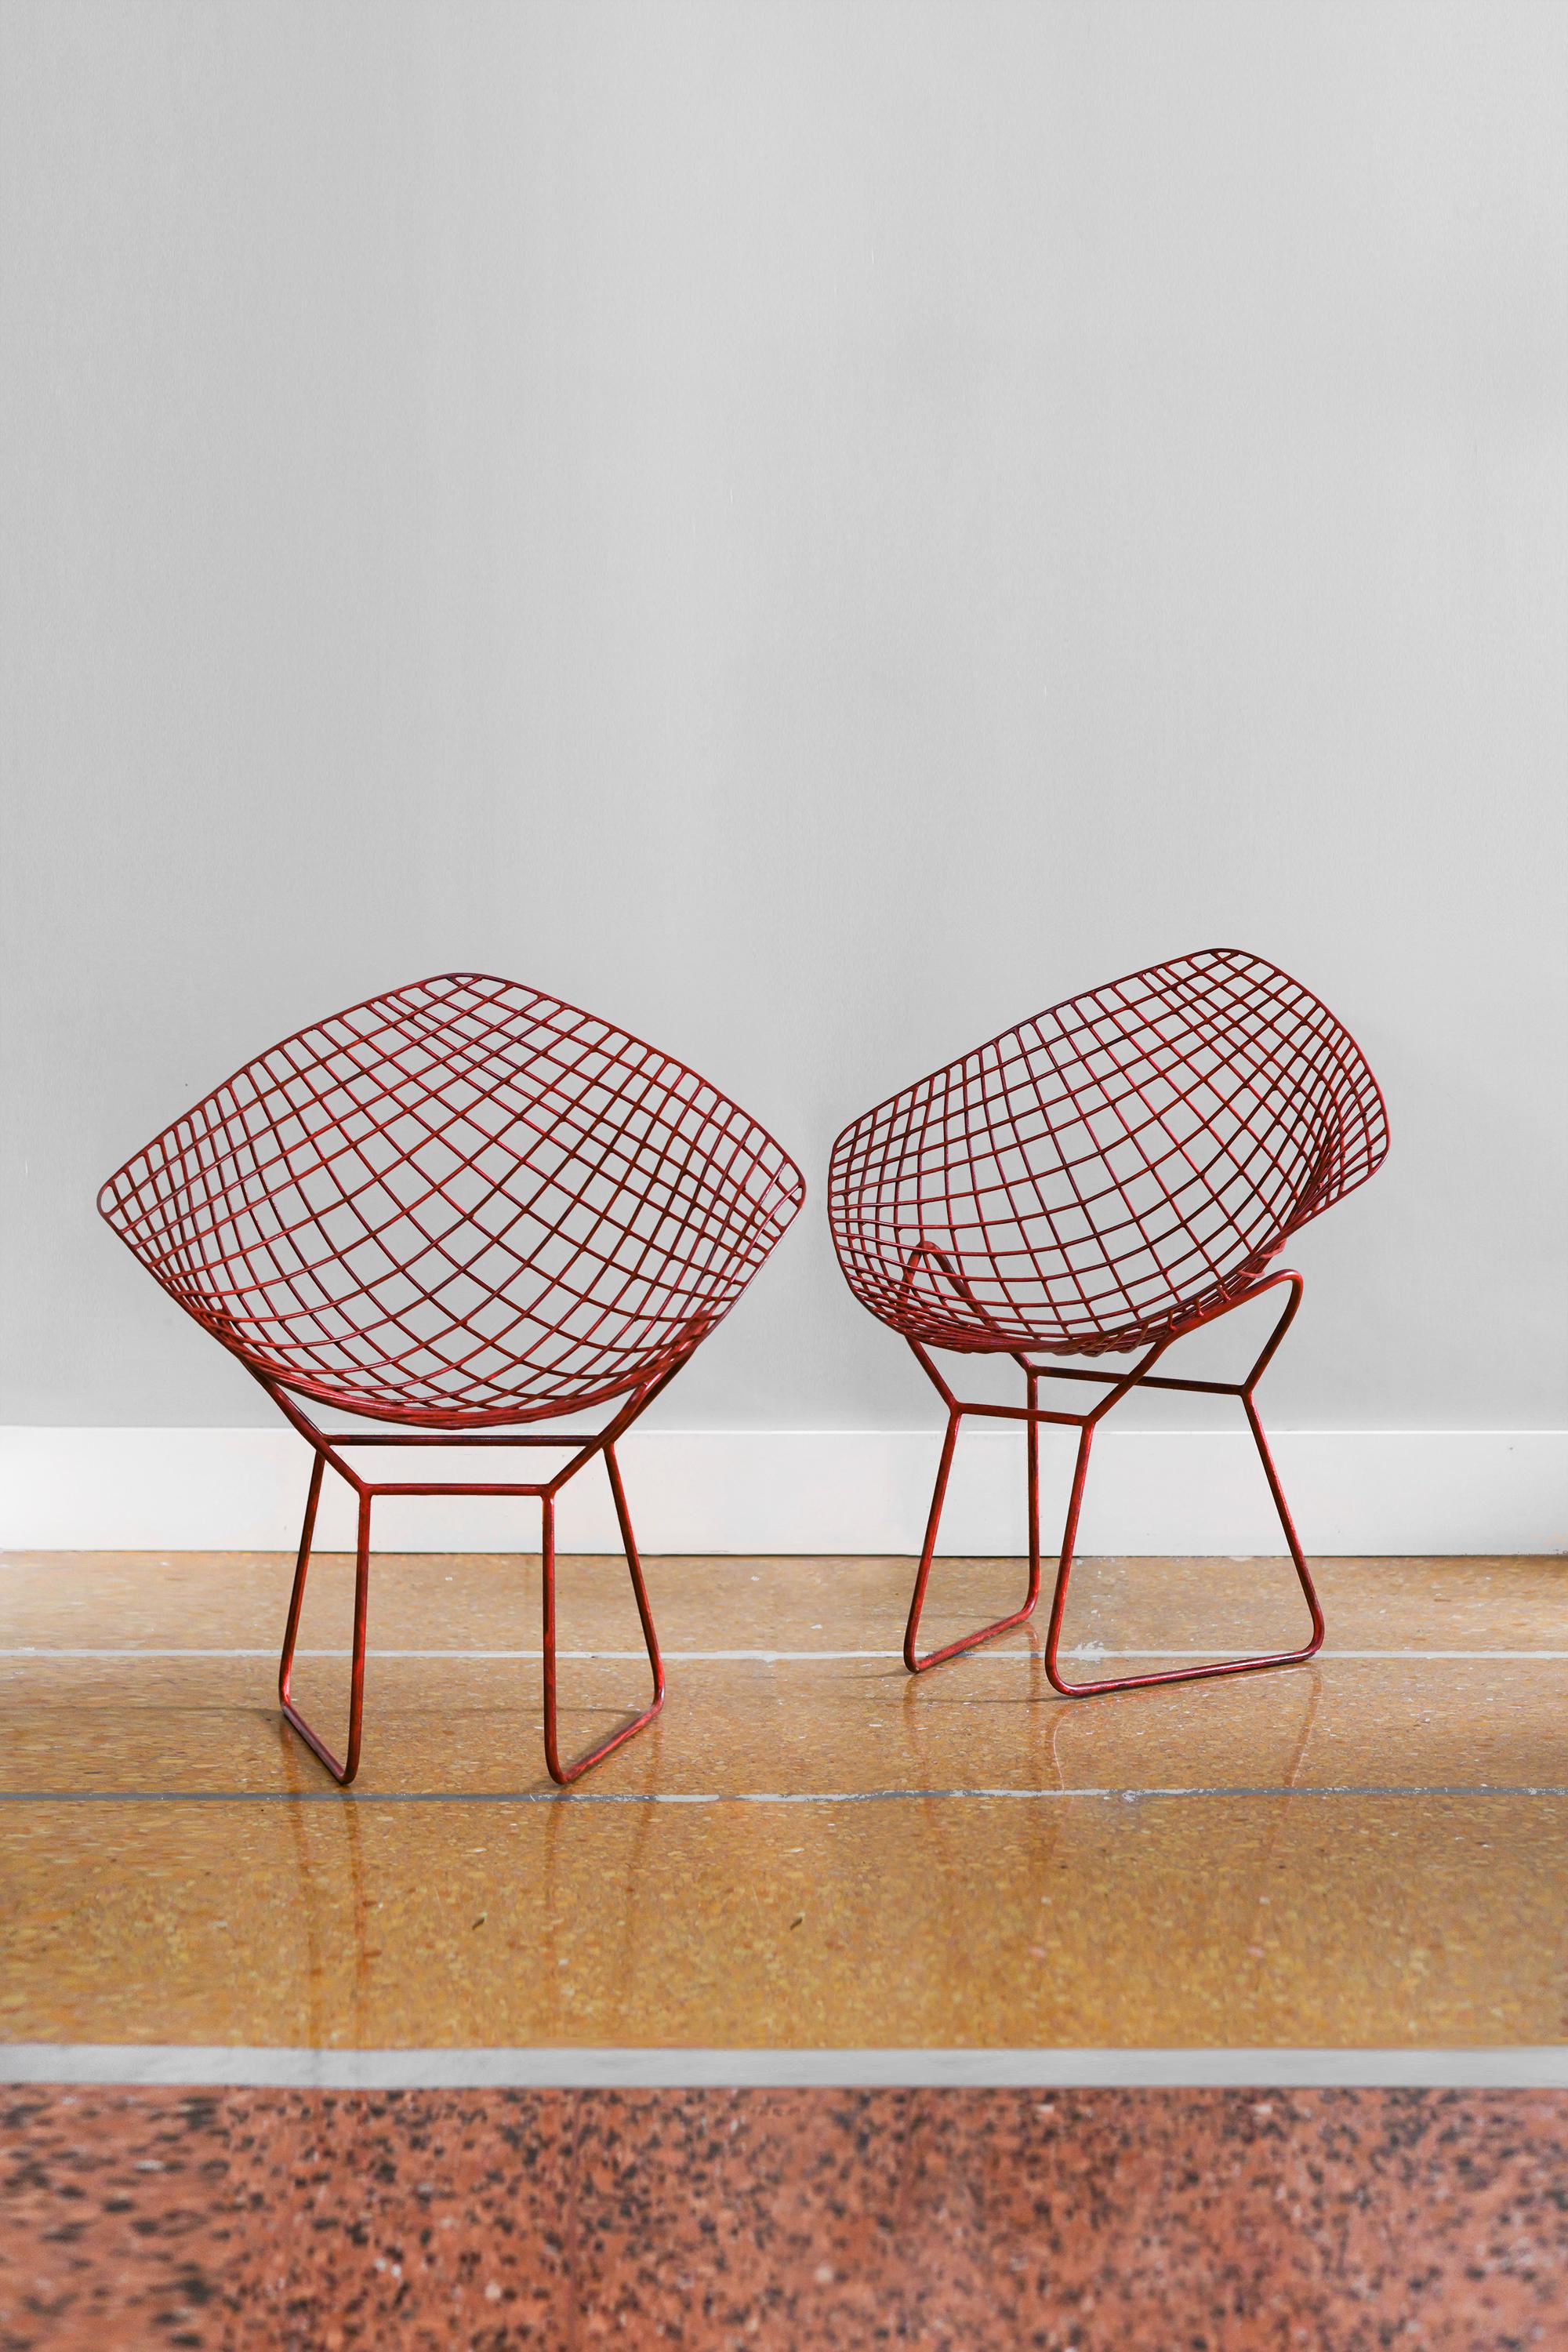 Pair of China red lacquered “Diamond” chairs by Harry Bertoia.
Production: Knoll, 1950s
Dimensions: 90 W x 70 H x 74 D cm
Sold as set of 2.